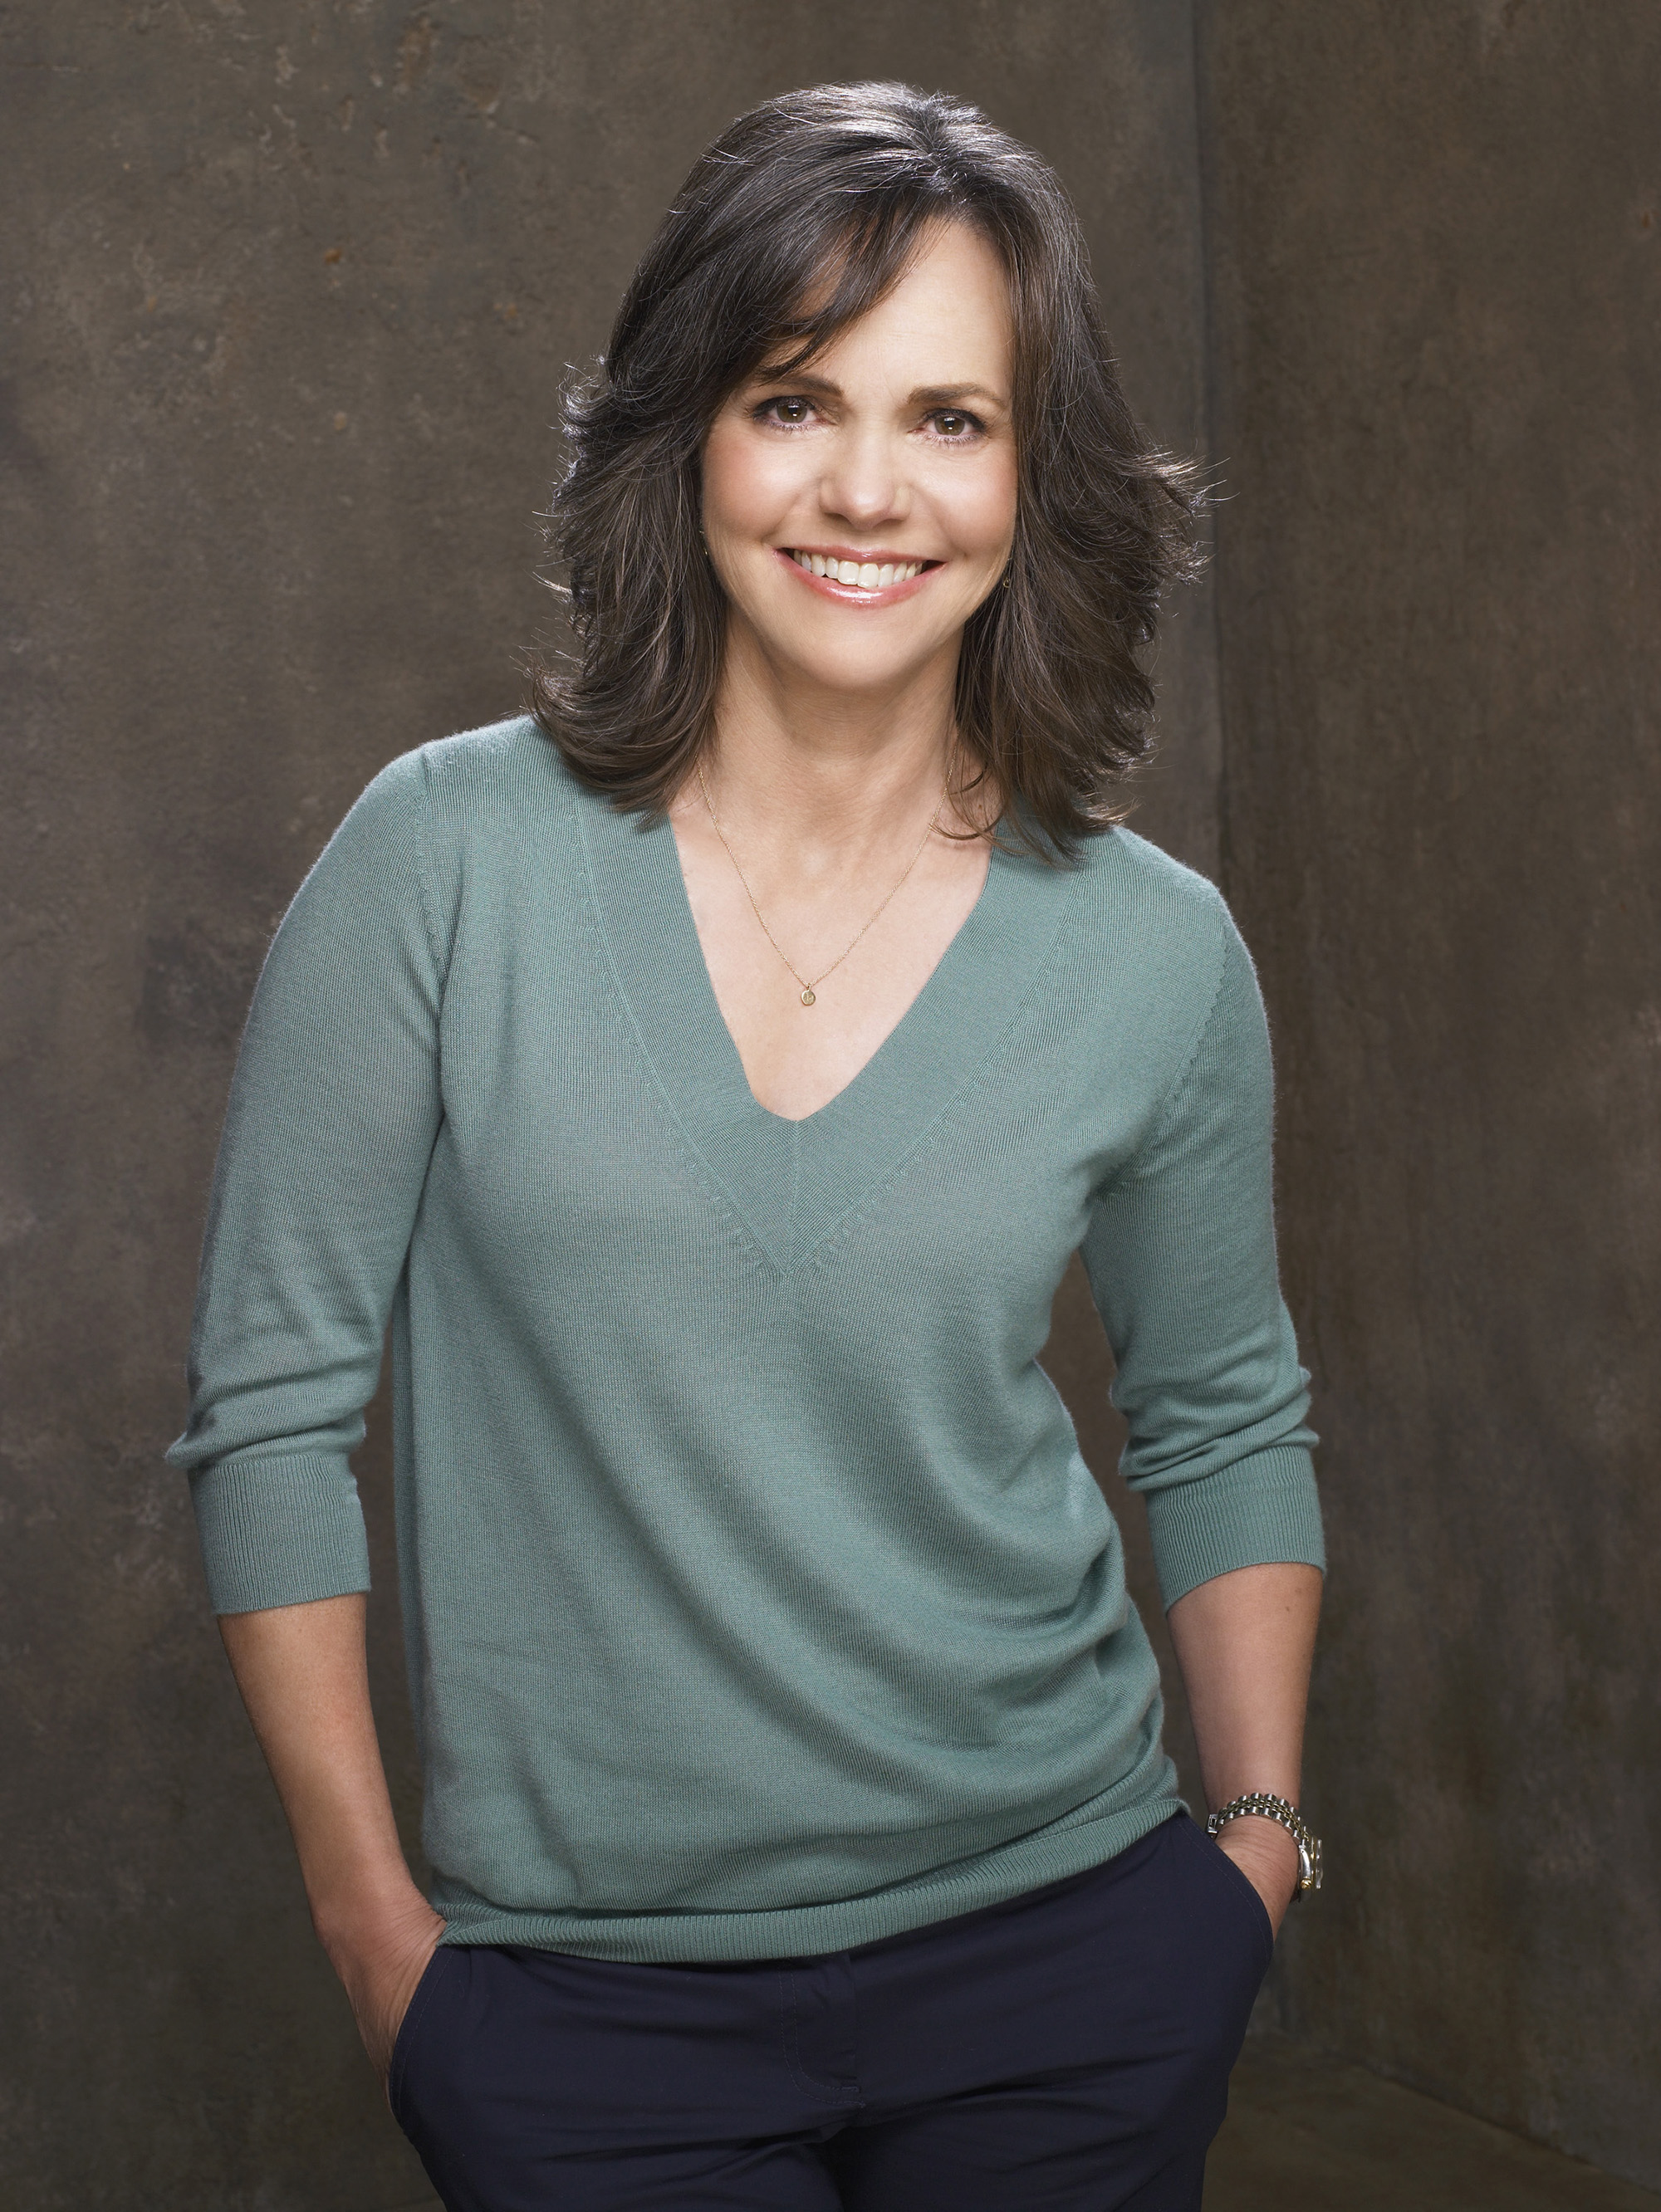 Sally Field Image HD Wallpaper And Background Photos